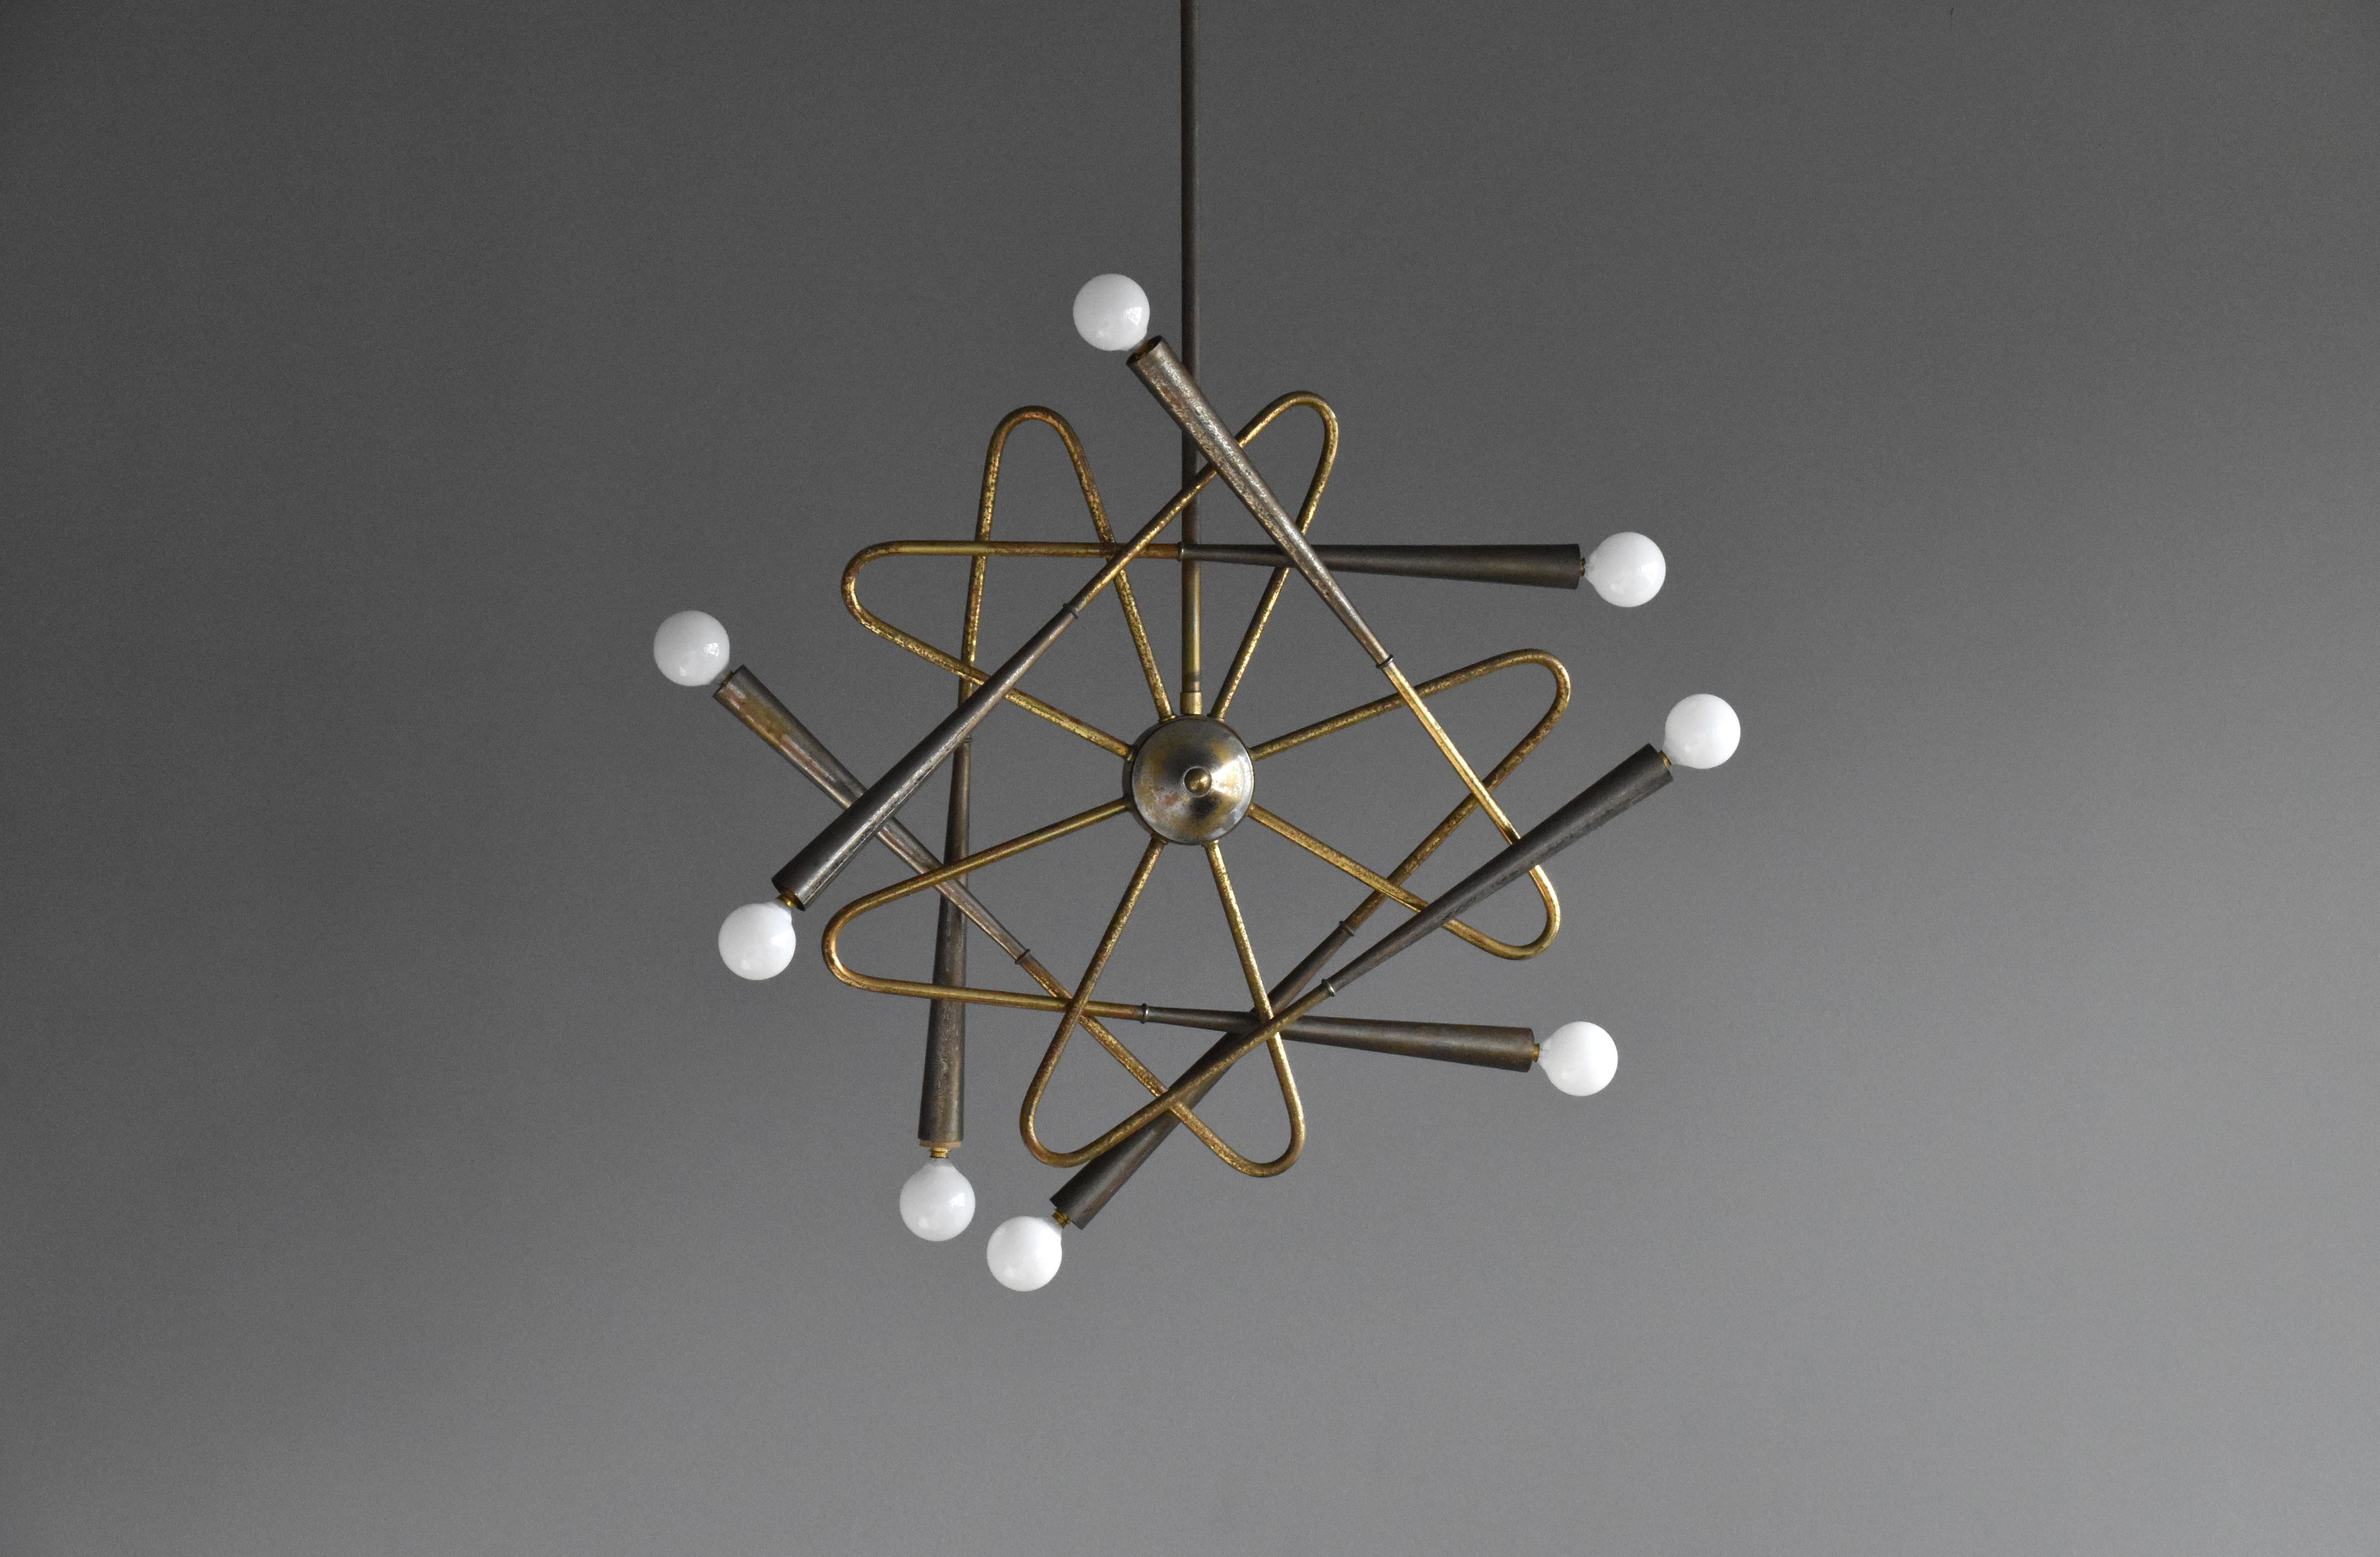 An adjustable eight-arm chandelier / ceiling lamp / pendant designed and produced by Stilnovo, Milan, Italy in the 1950s. 

A similar model Stilnovo lamp of similar dimensions achieved $40,000 at Phillips auction, Design December 13, 2018.

Other